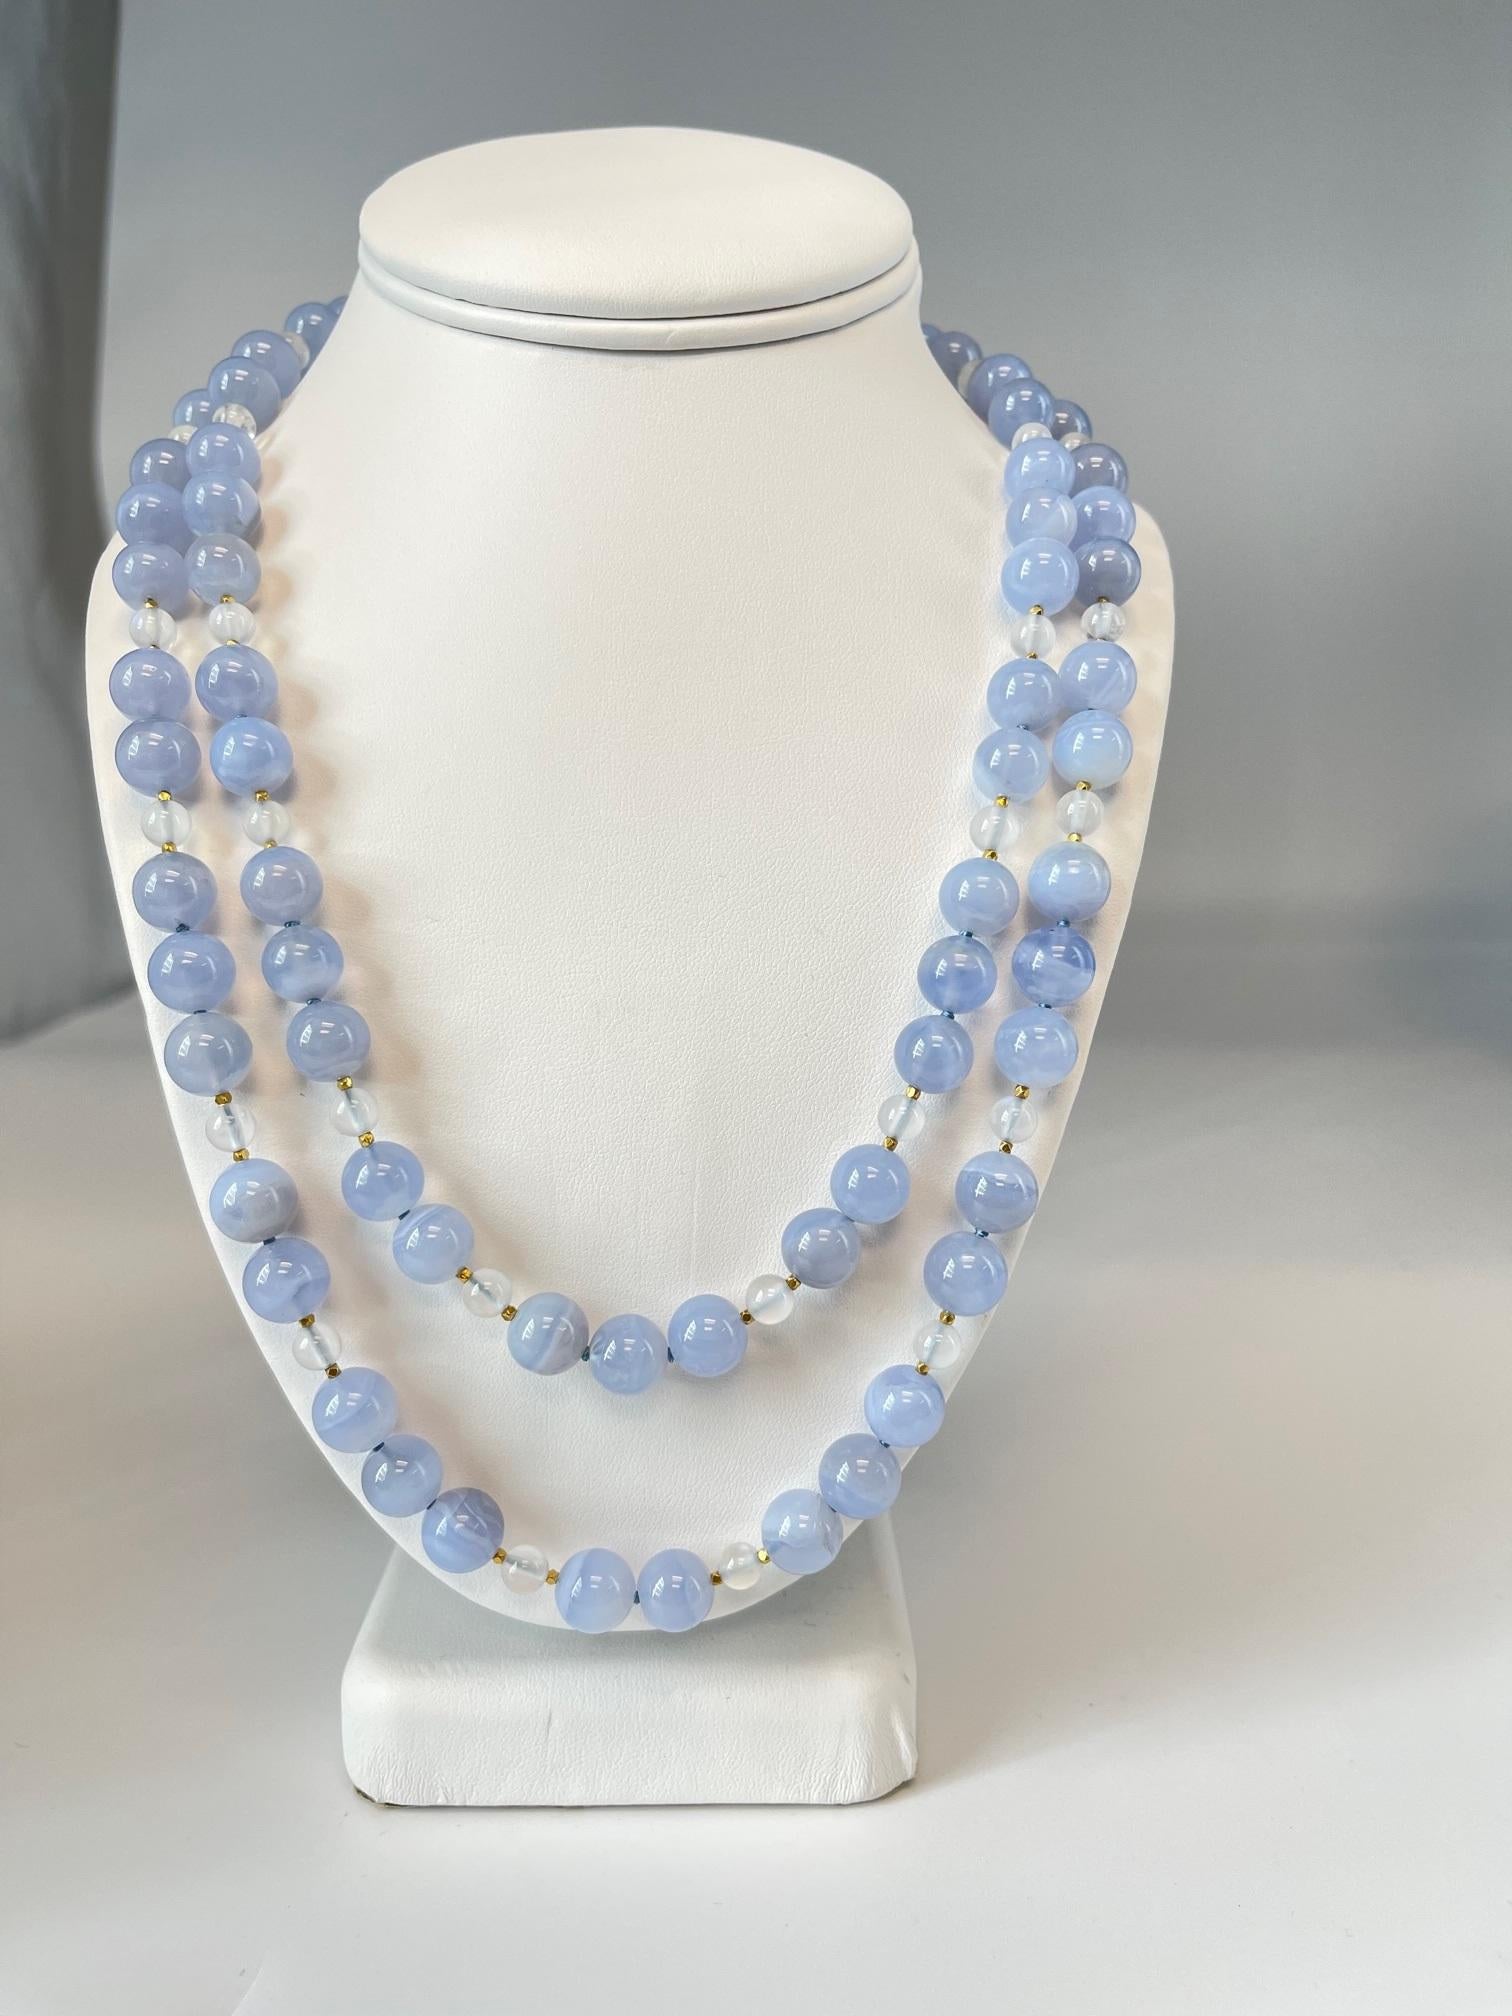 10mm Chalcedony and Moonstone Bead Necklace with Yellow Gold Accents For Sale 3